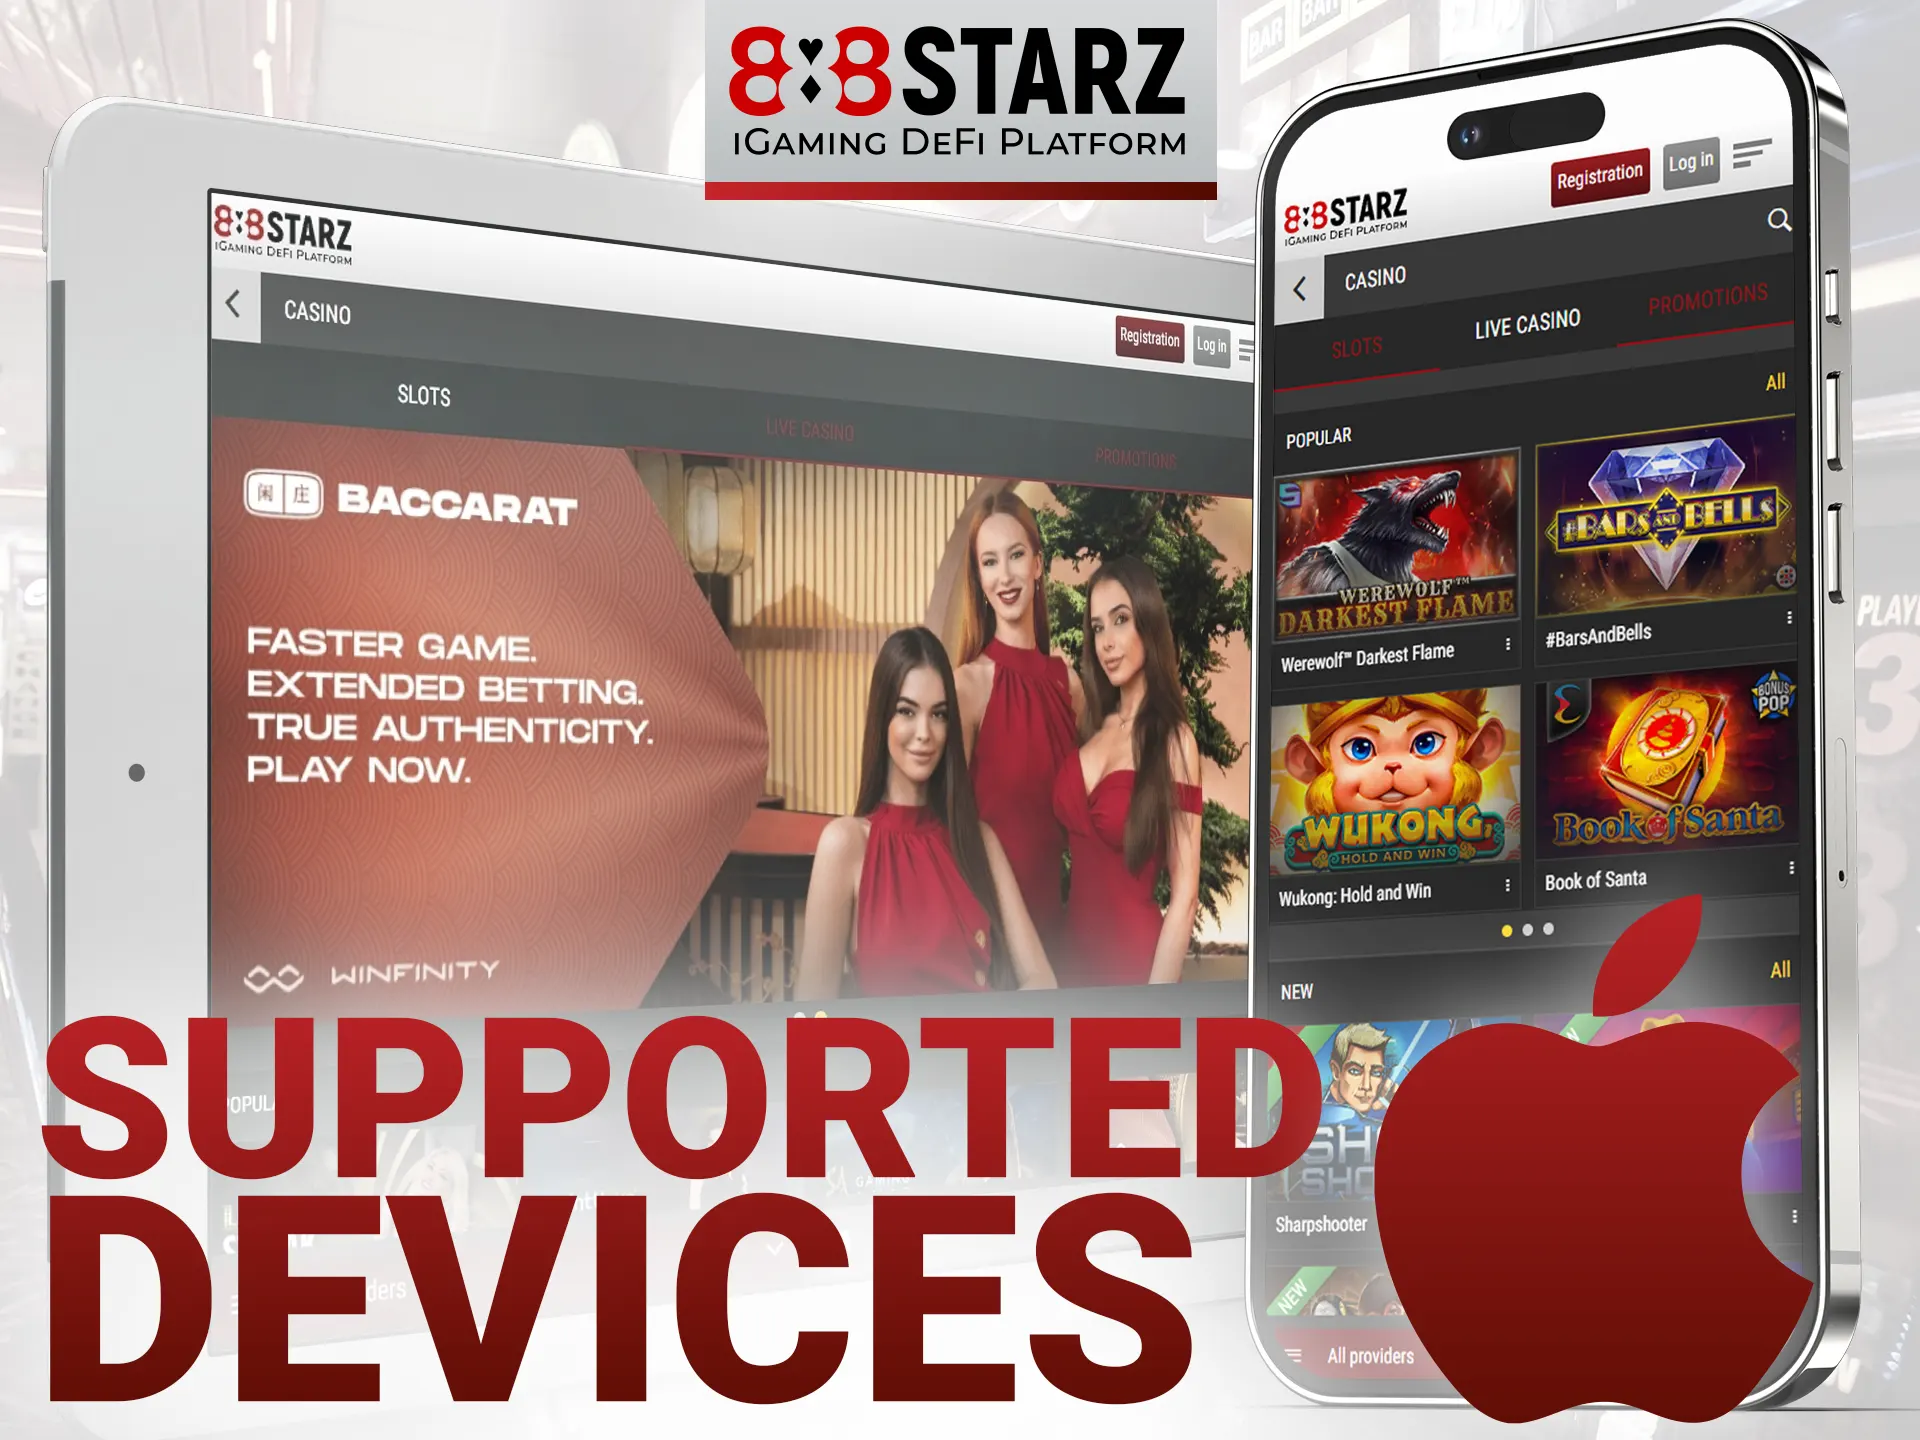 Install the 888Starz app on your iOS device.